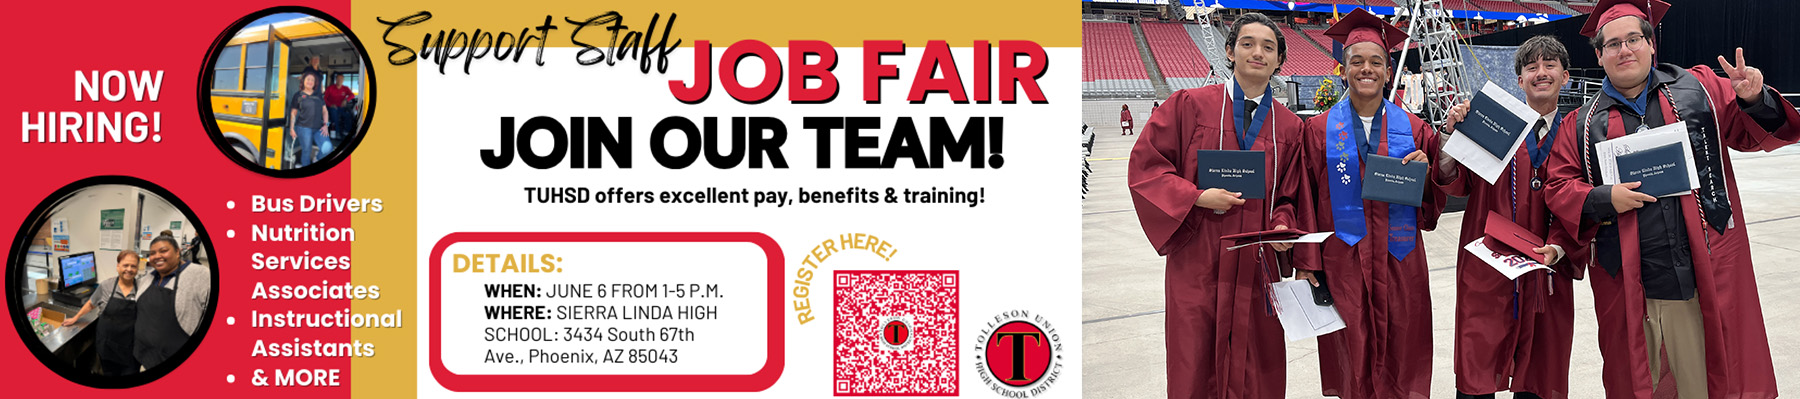 TUHSD Job Fair- we offer excellent pay, benefits, & training! Hiring bus drivers, nutrition services associates, instructional assistants & more. June 6 from 1-5 pm at Sierra Linda HS in Phoenix, AZ 85043 | Student standing on podium